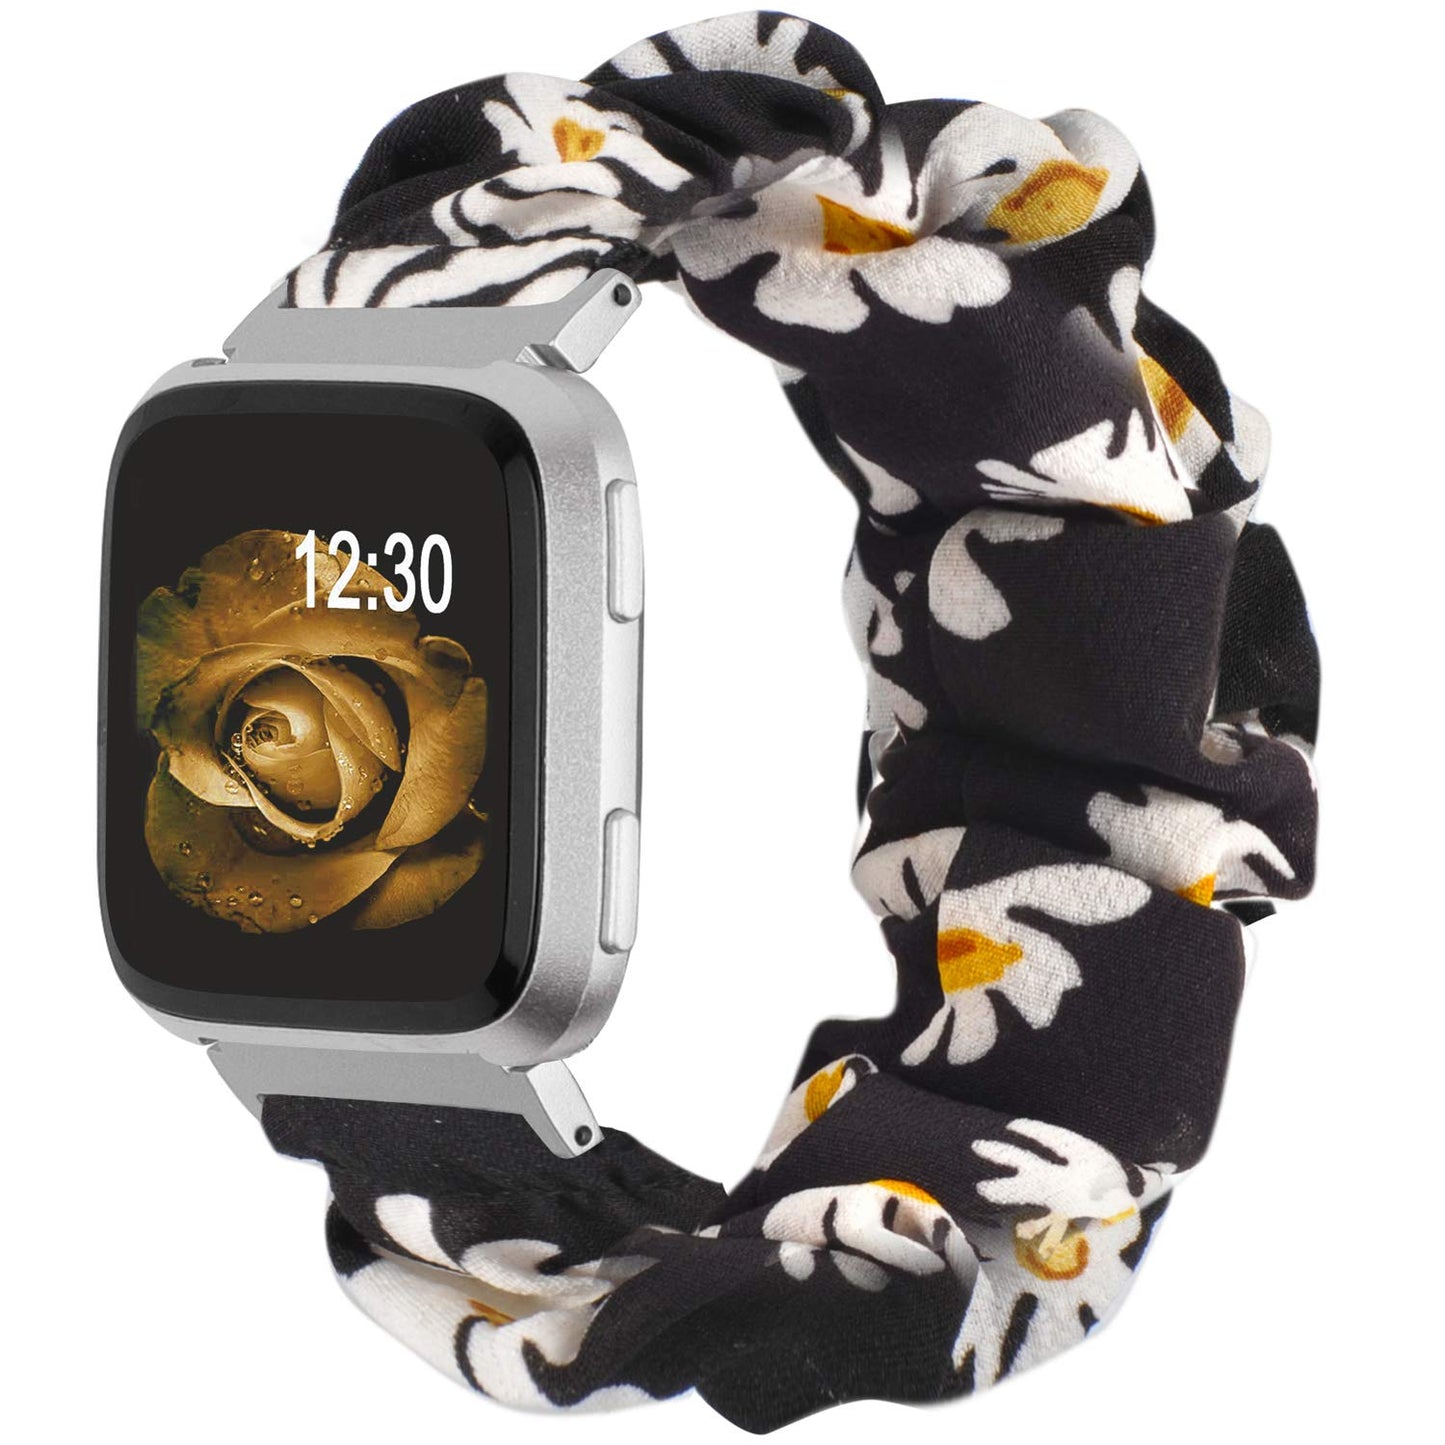 TOYOUTHS Scrunchie Bands Compatible with Fitbit Versa/Versa 2/Versa Lite Special Edition Women Girl Elastic Stretch Fabric Strap Pattern Printed Scrunchy Replacement Bracelet Wristband Accessories